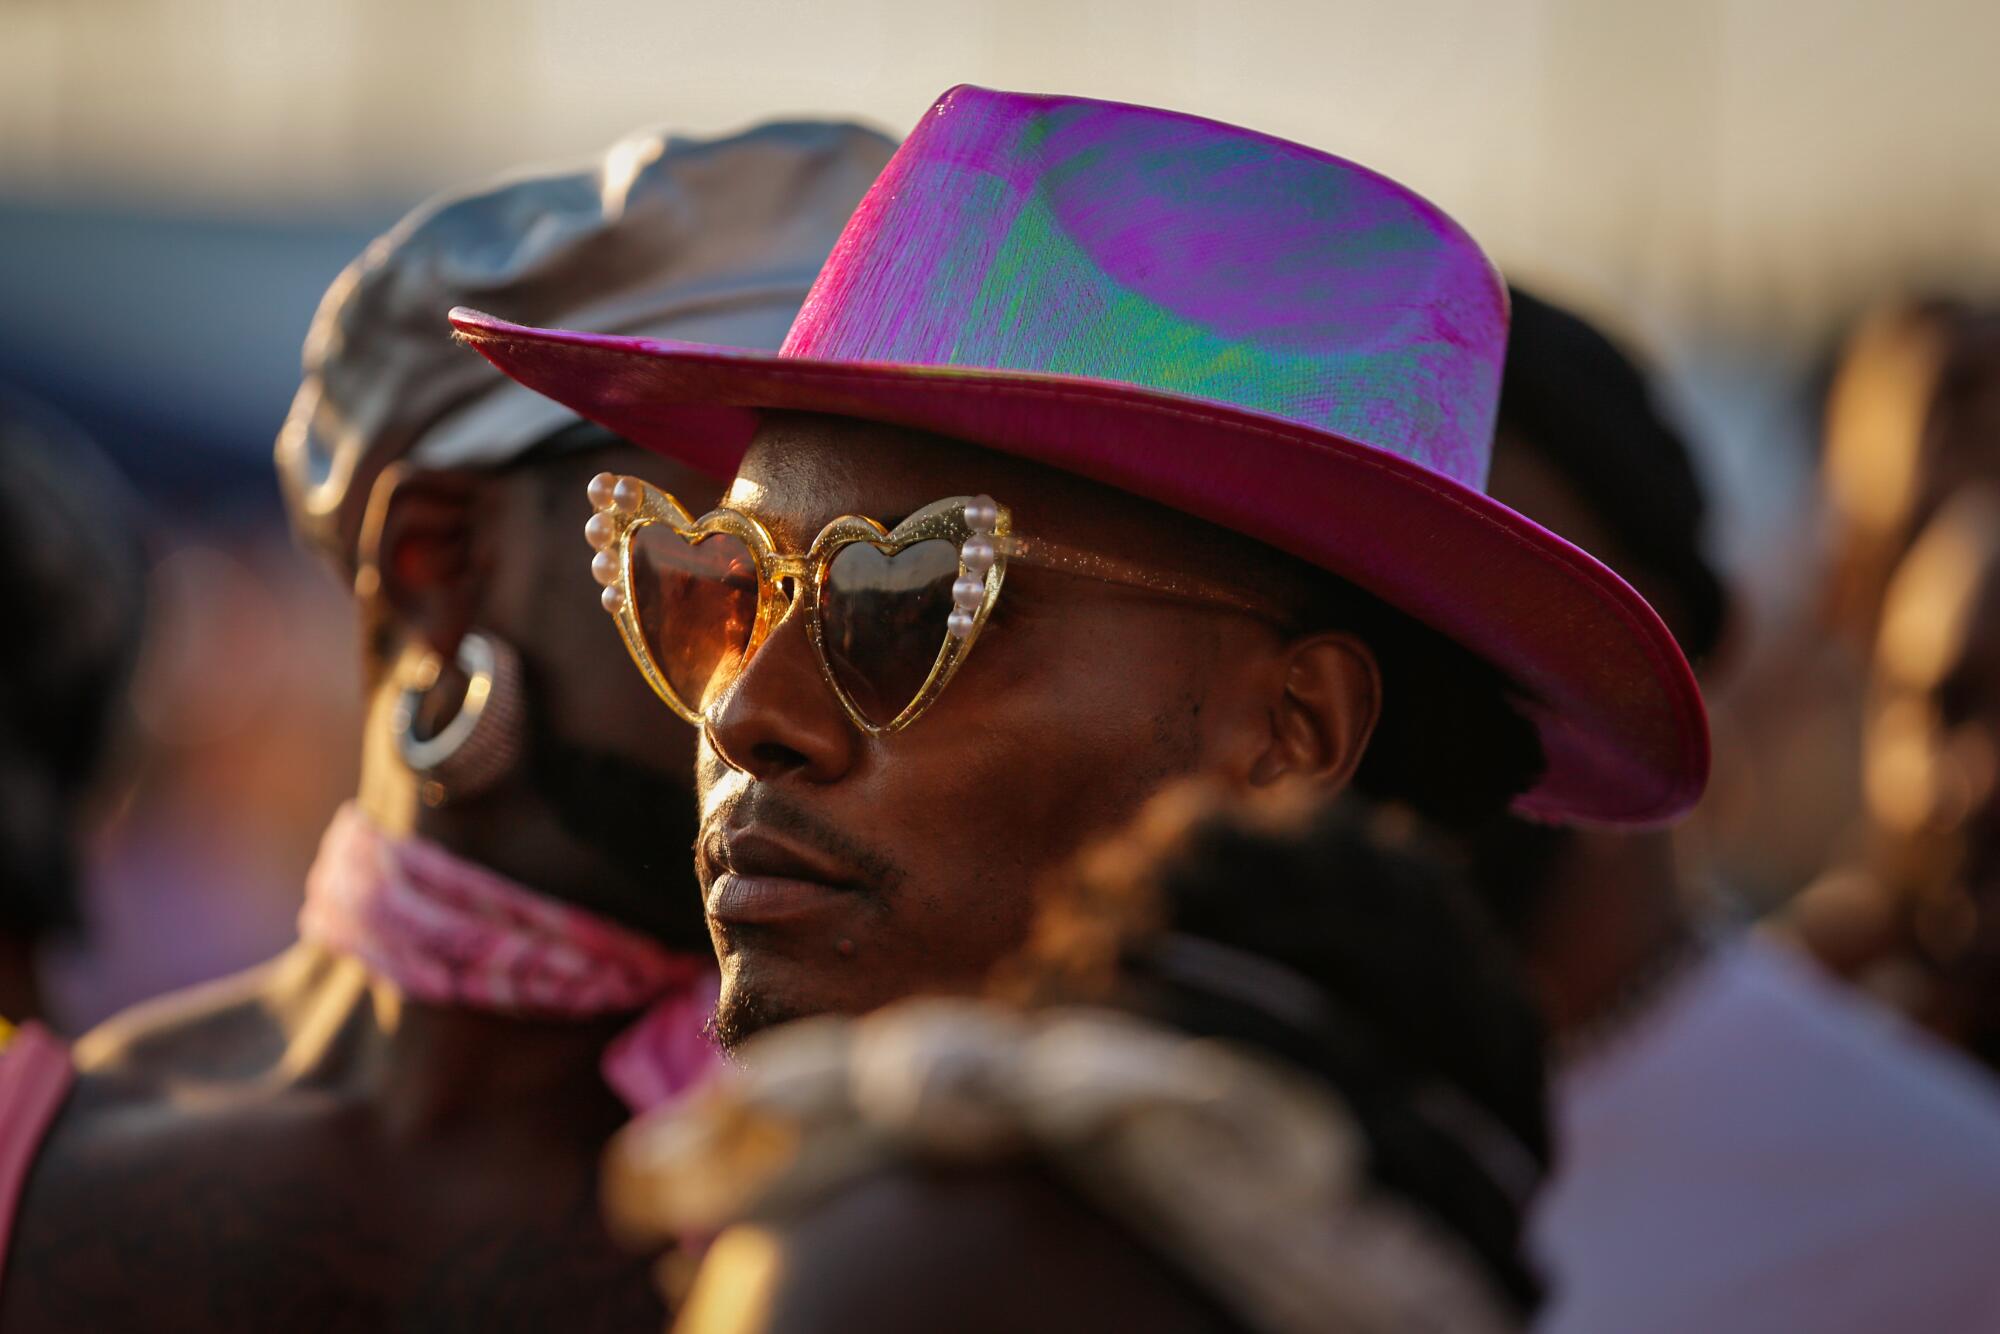 Fashion was front and center at the fifth annual South L.A. Pride.